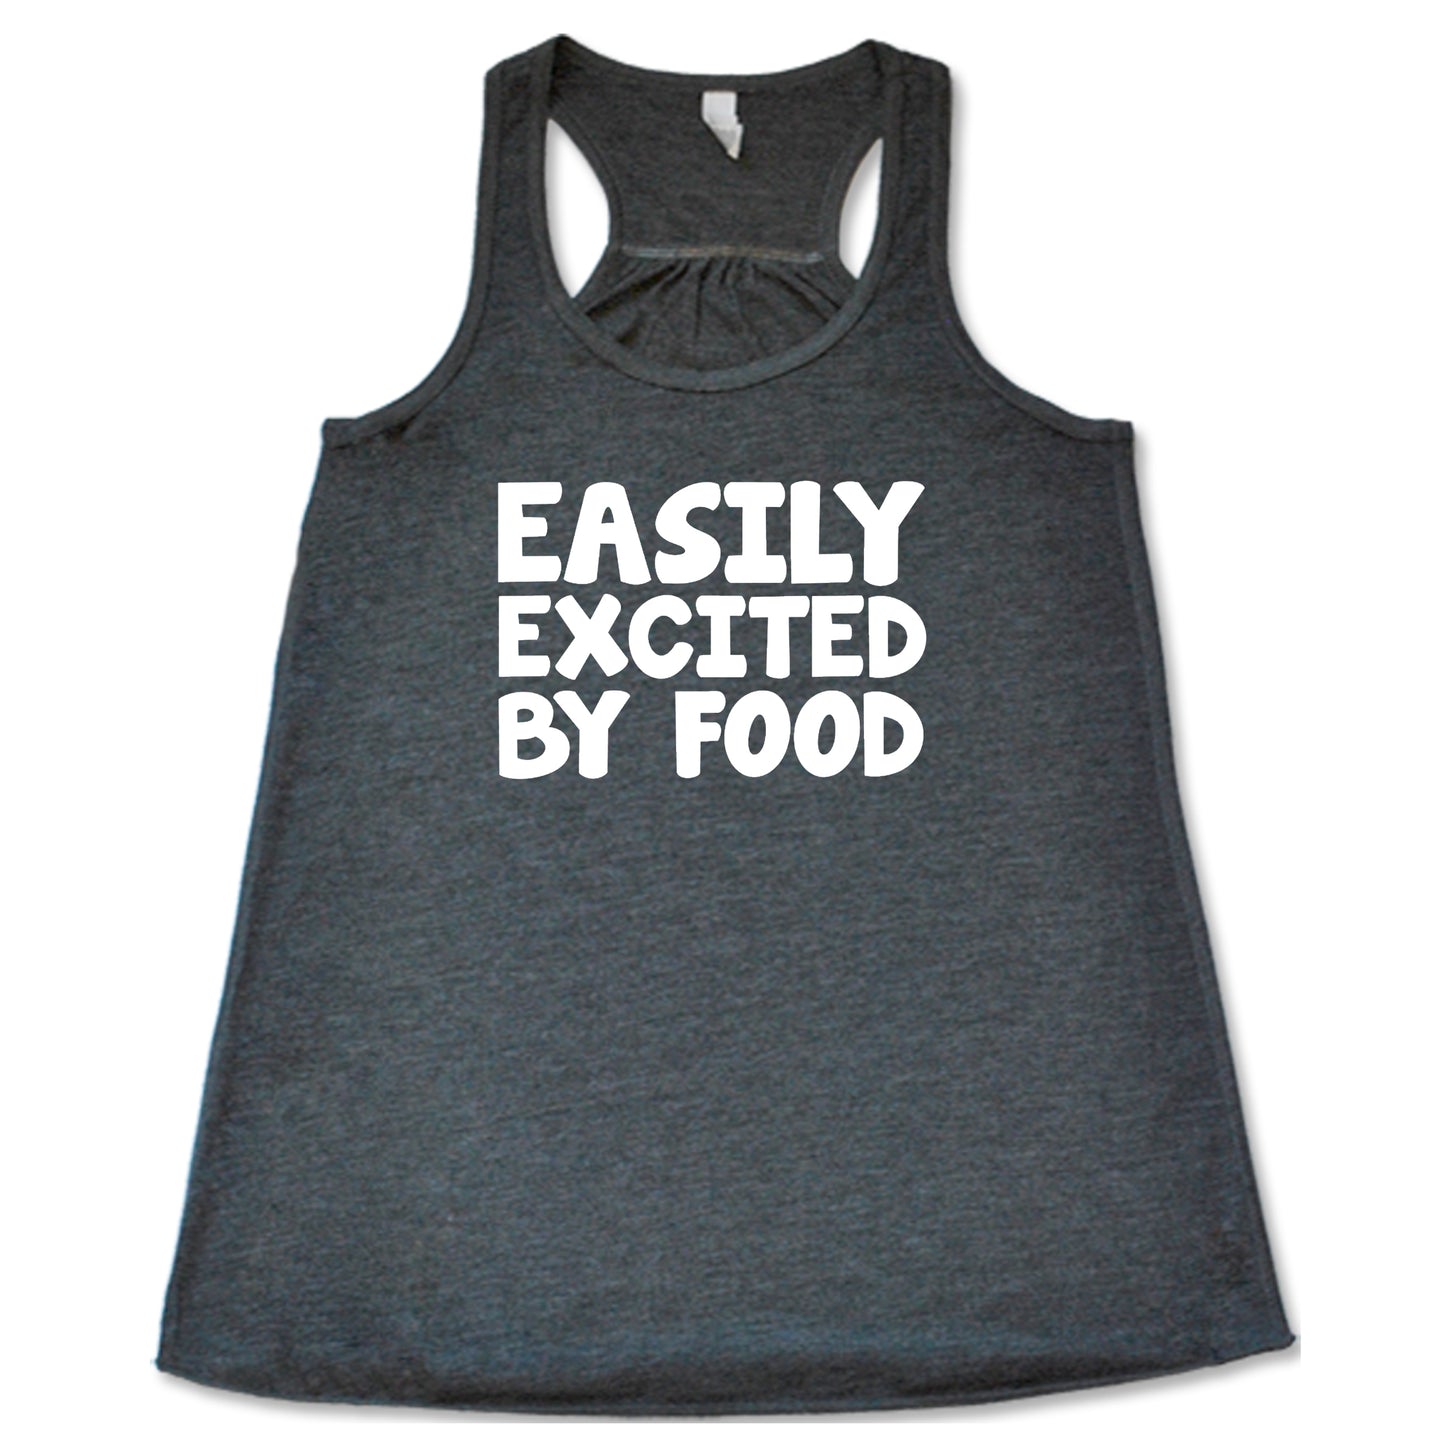 Easily Excited By Food Shirt